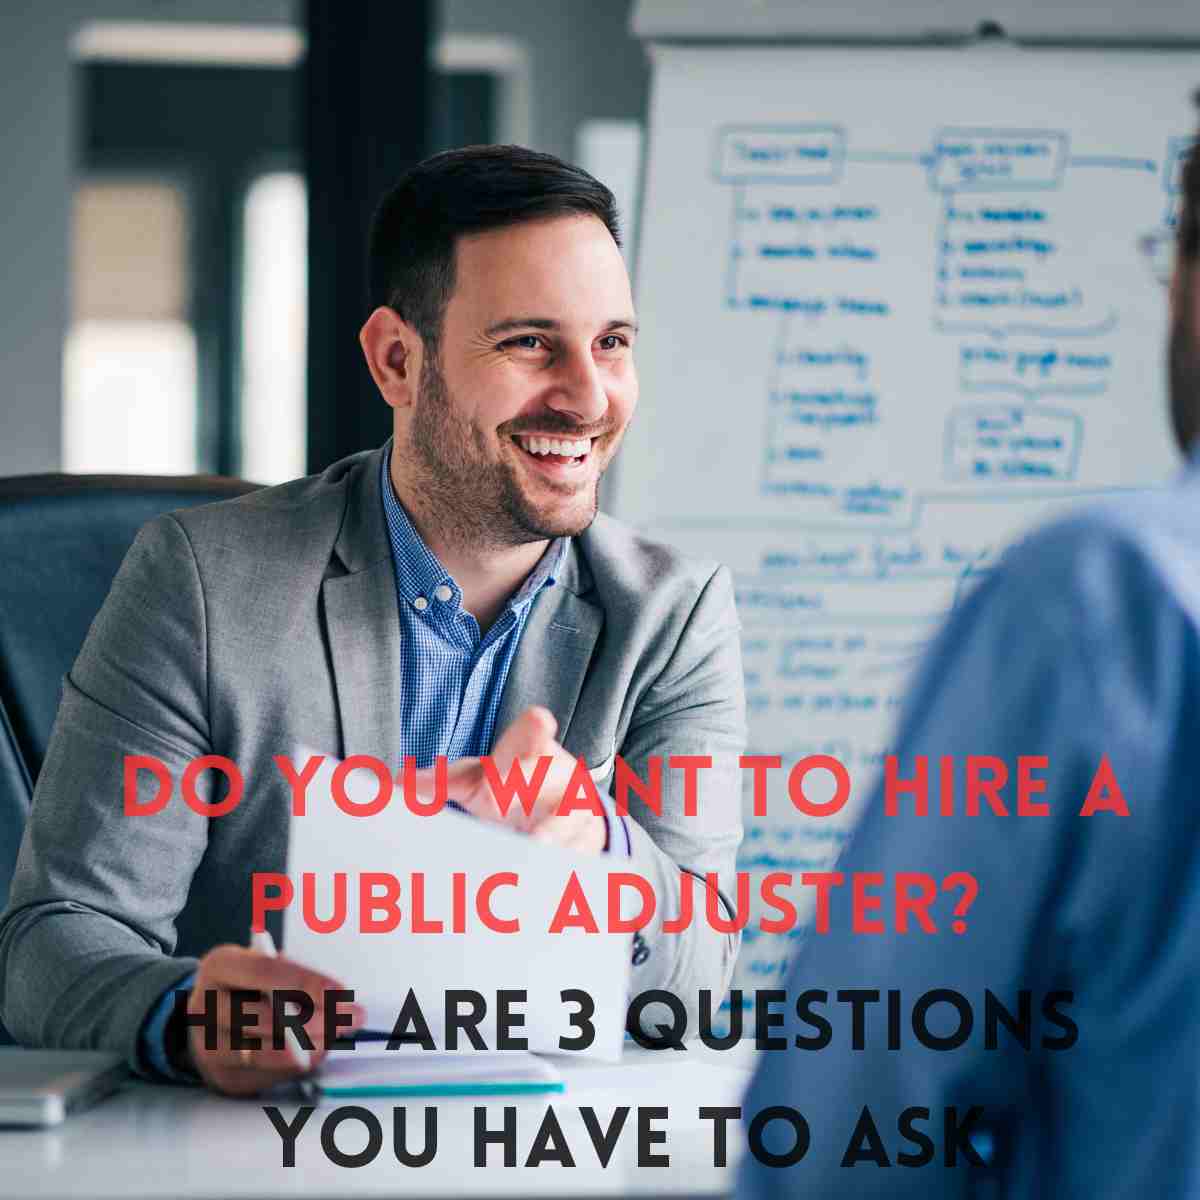 Do You Want To Hire a Public Adjuster